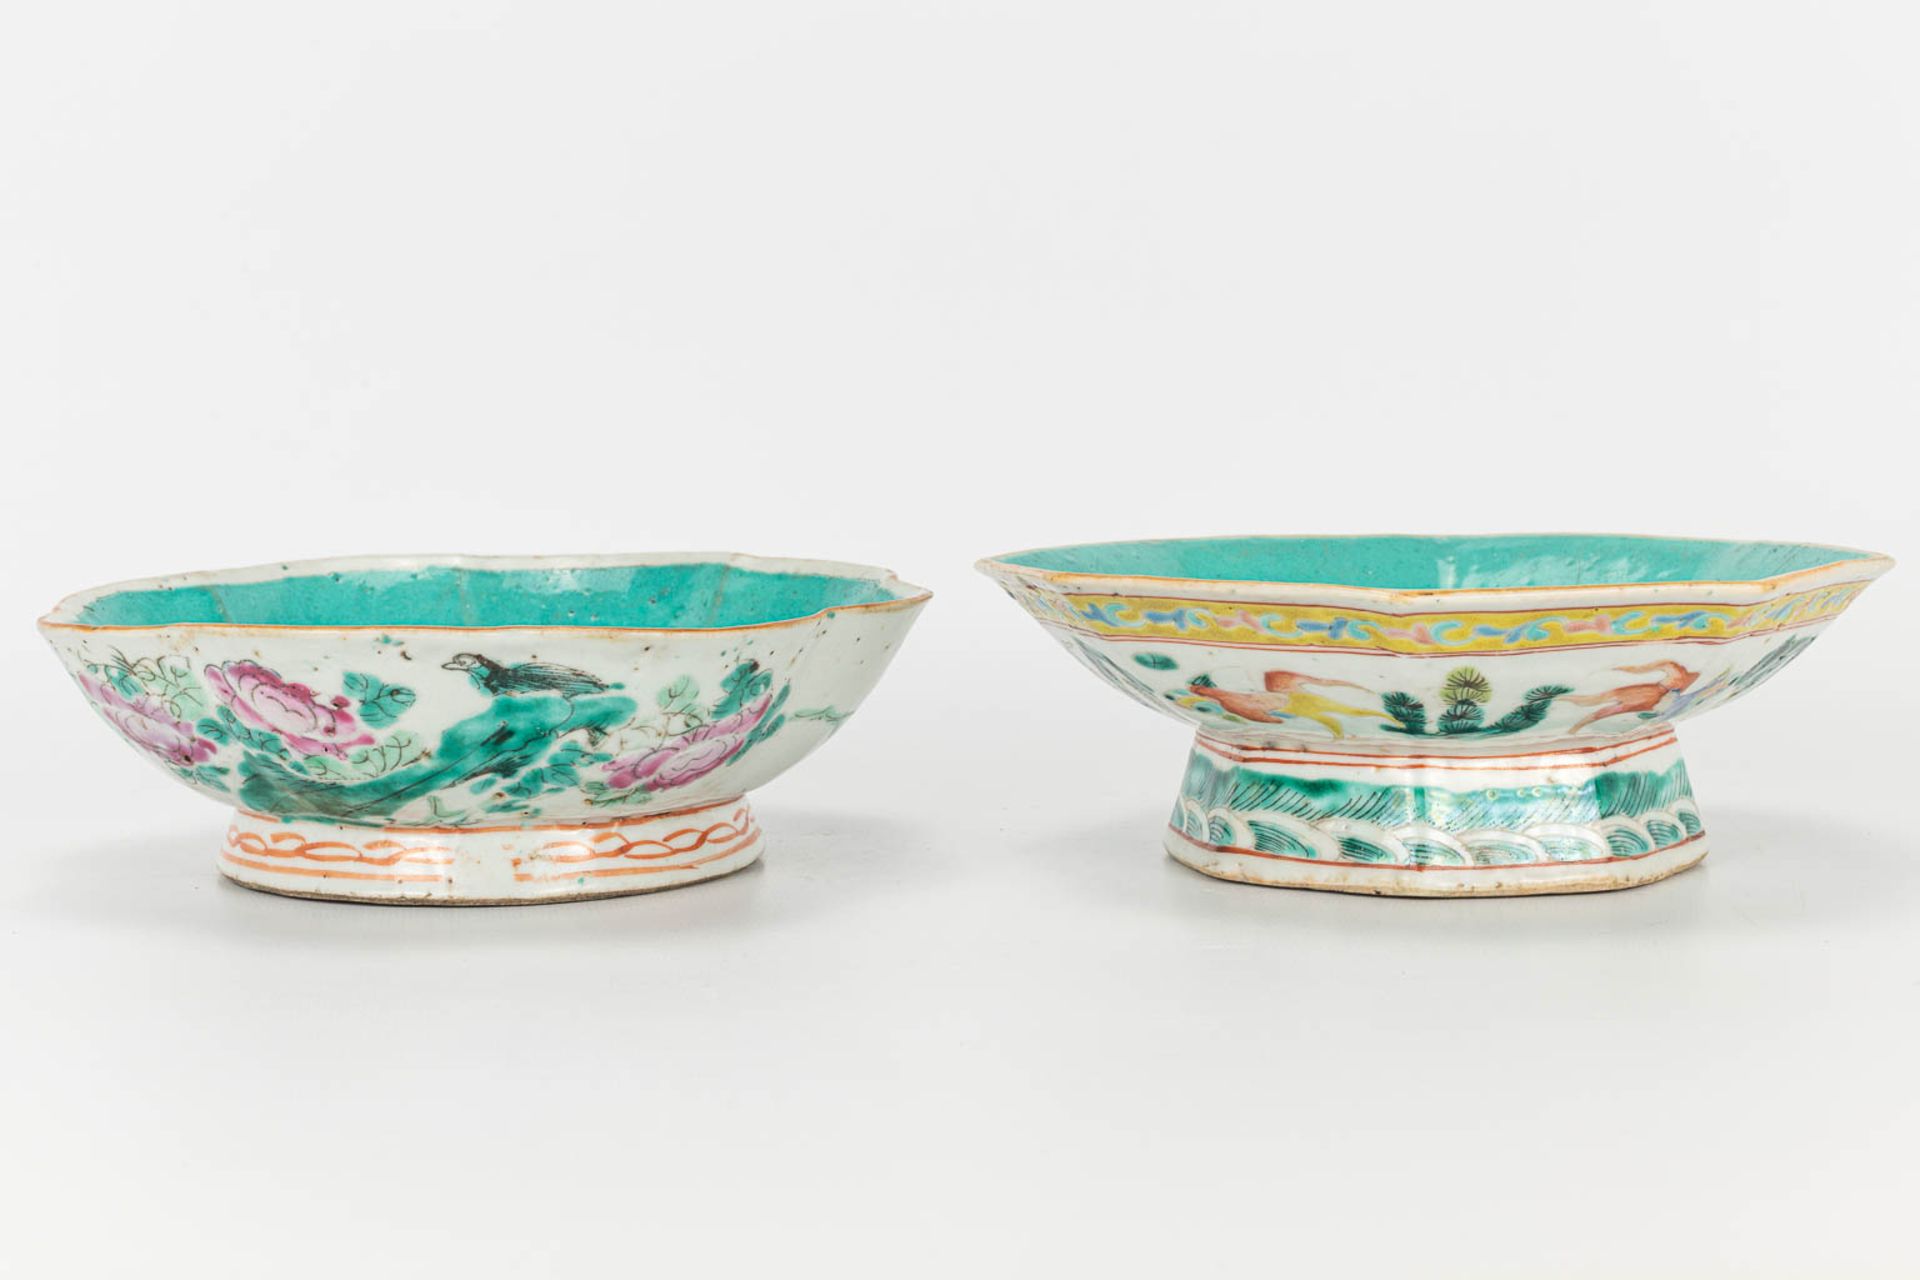 A set of 4 items made of Chinese porcelain. 2 small bowls and 2 ginger jars without lids. - Image 5 of 23